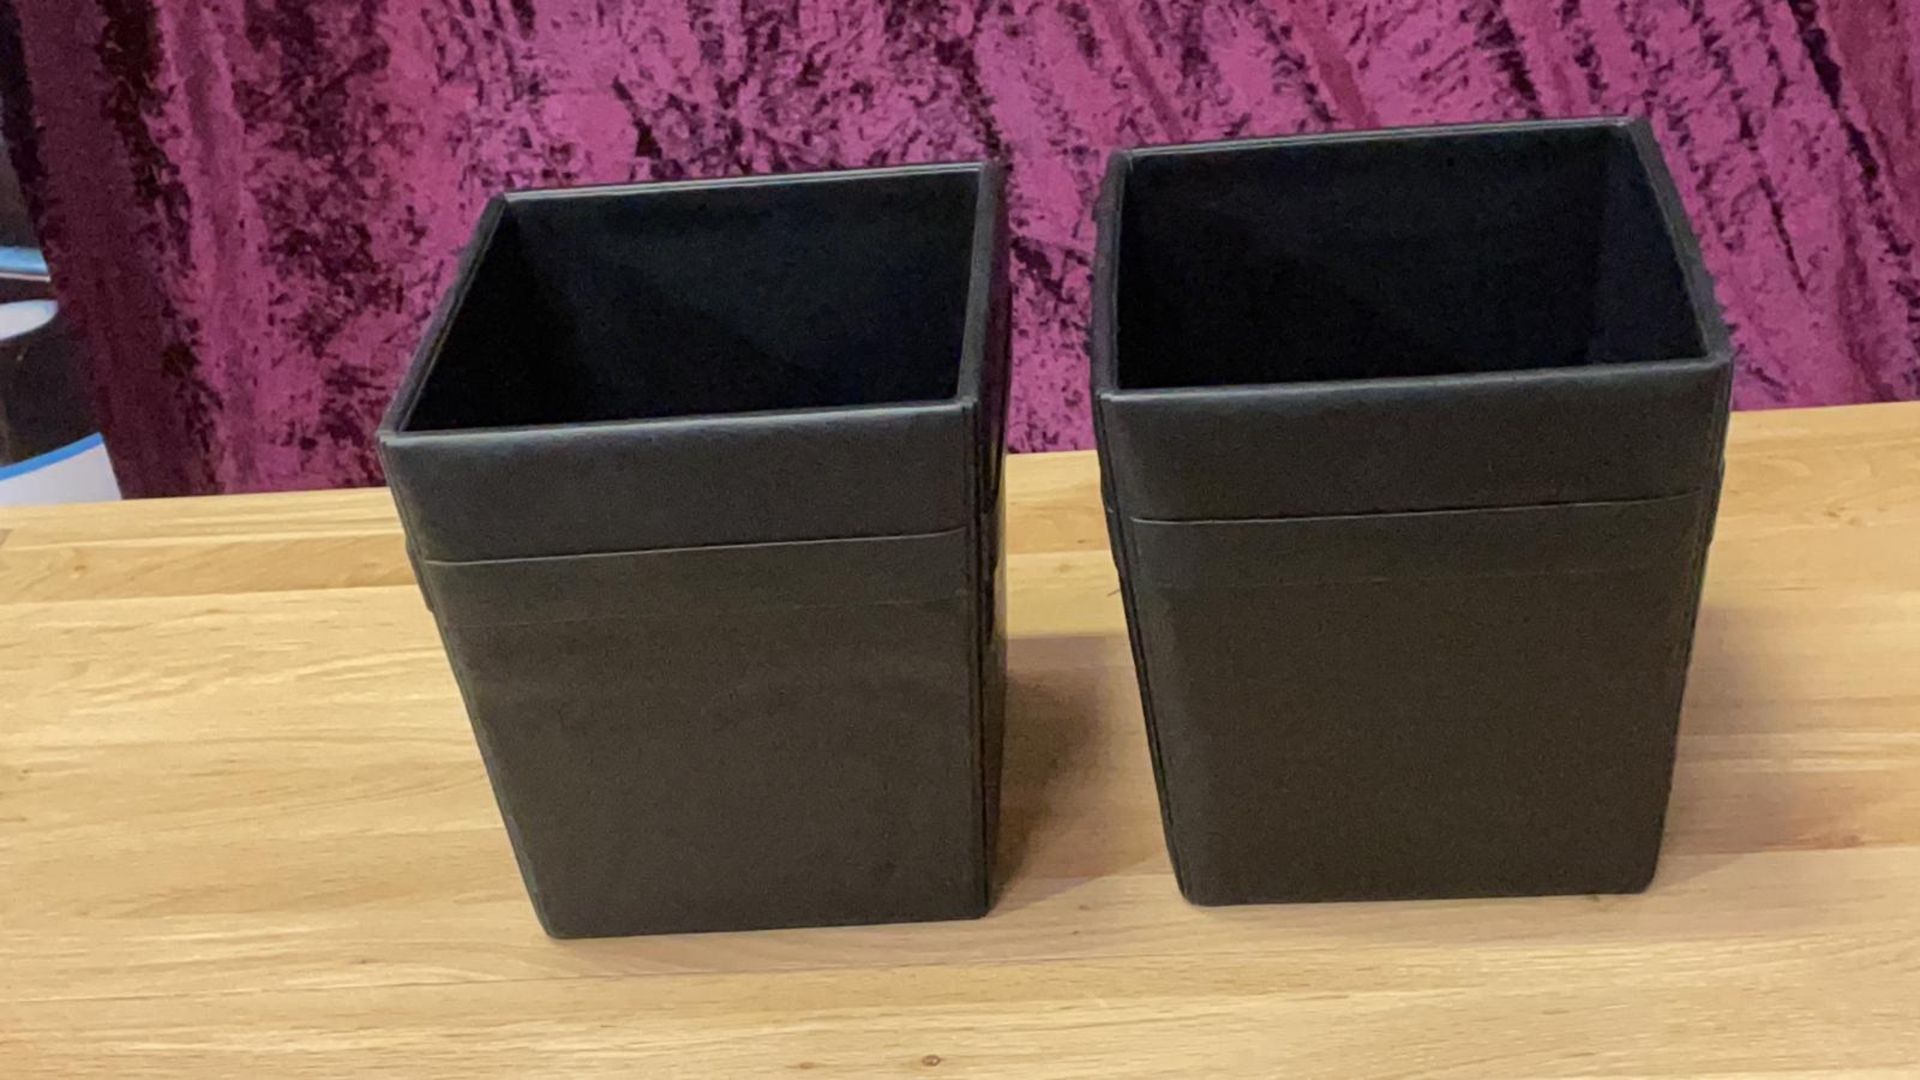 A pair of faux leather clad paper bins - Wooden structure and high quality PU leather surface